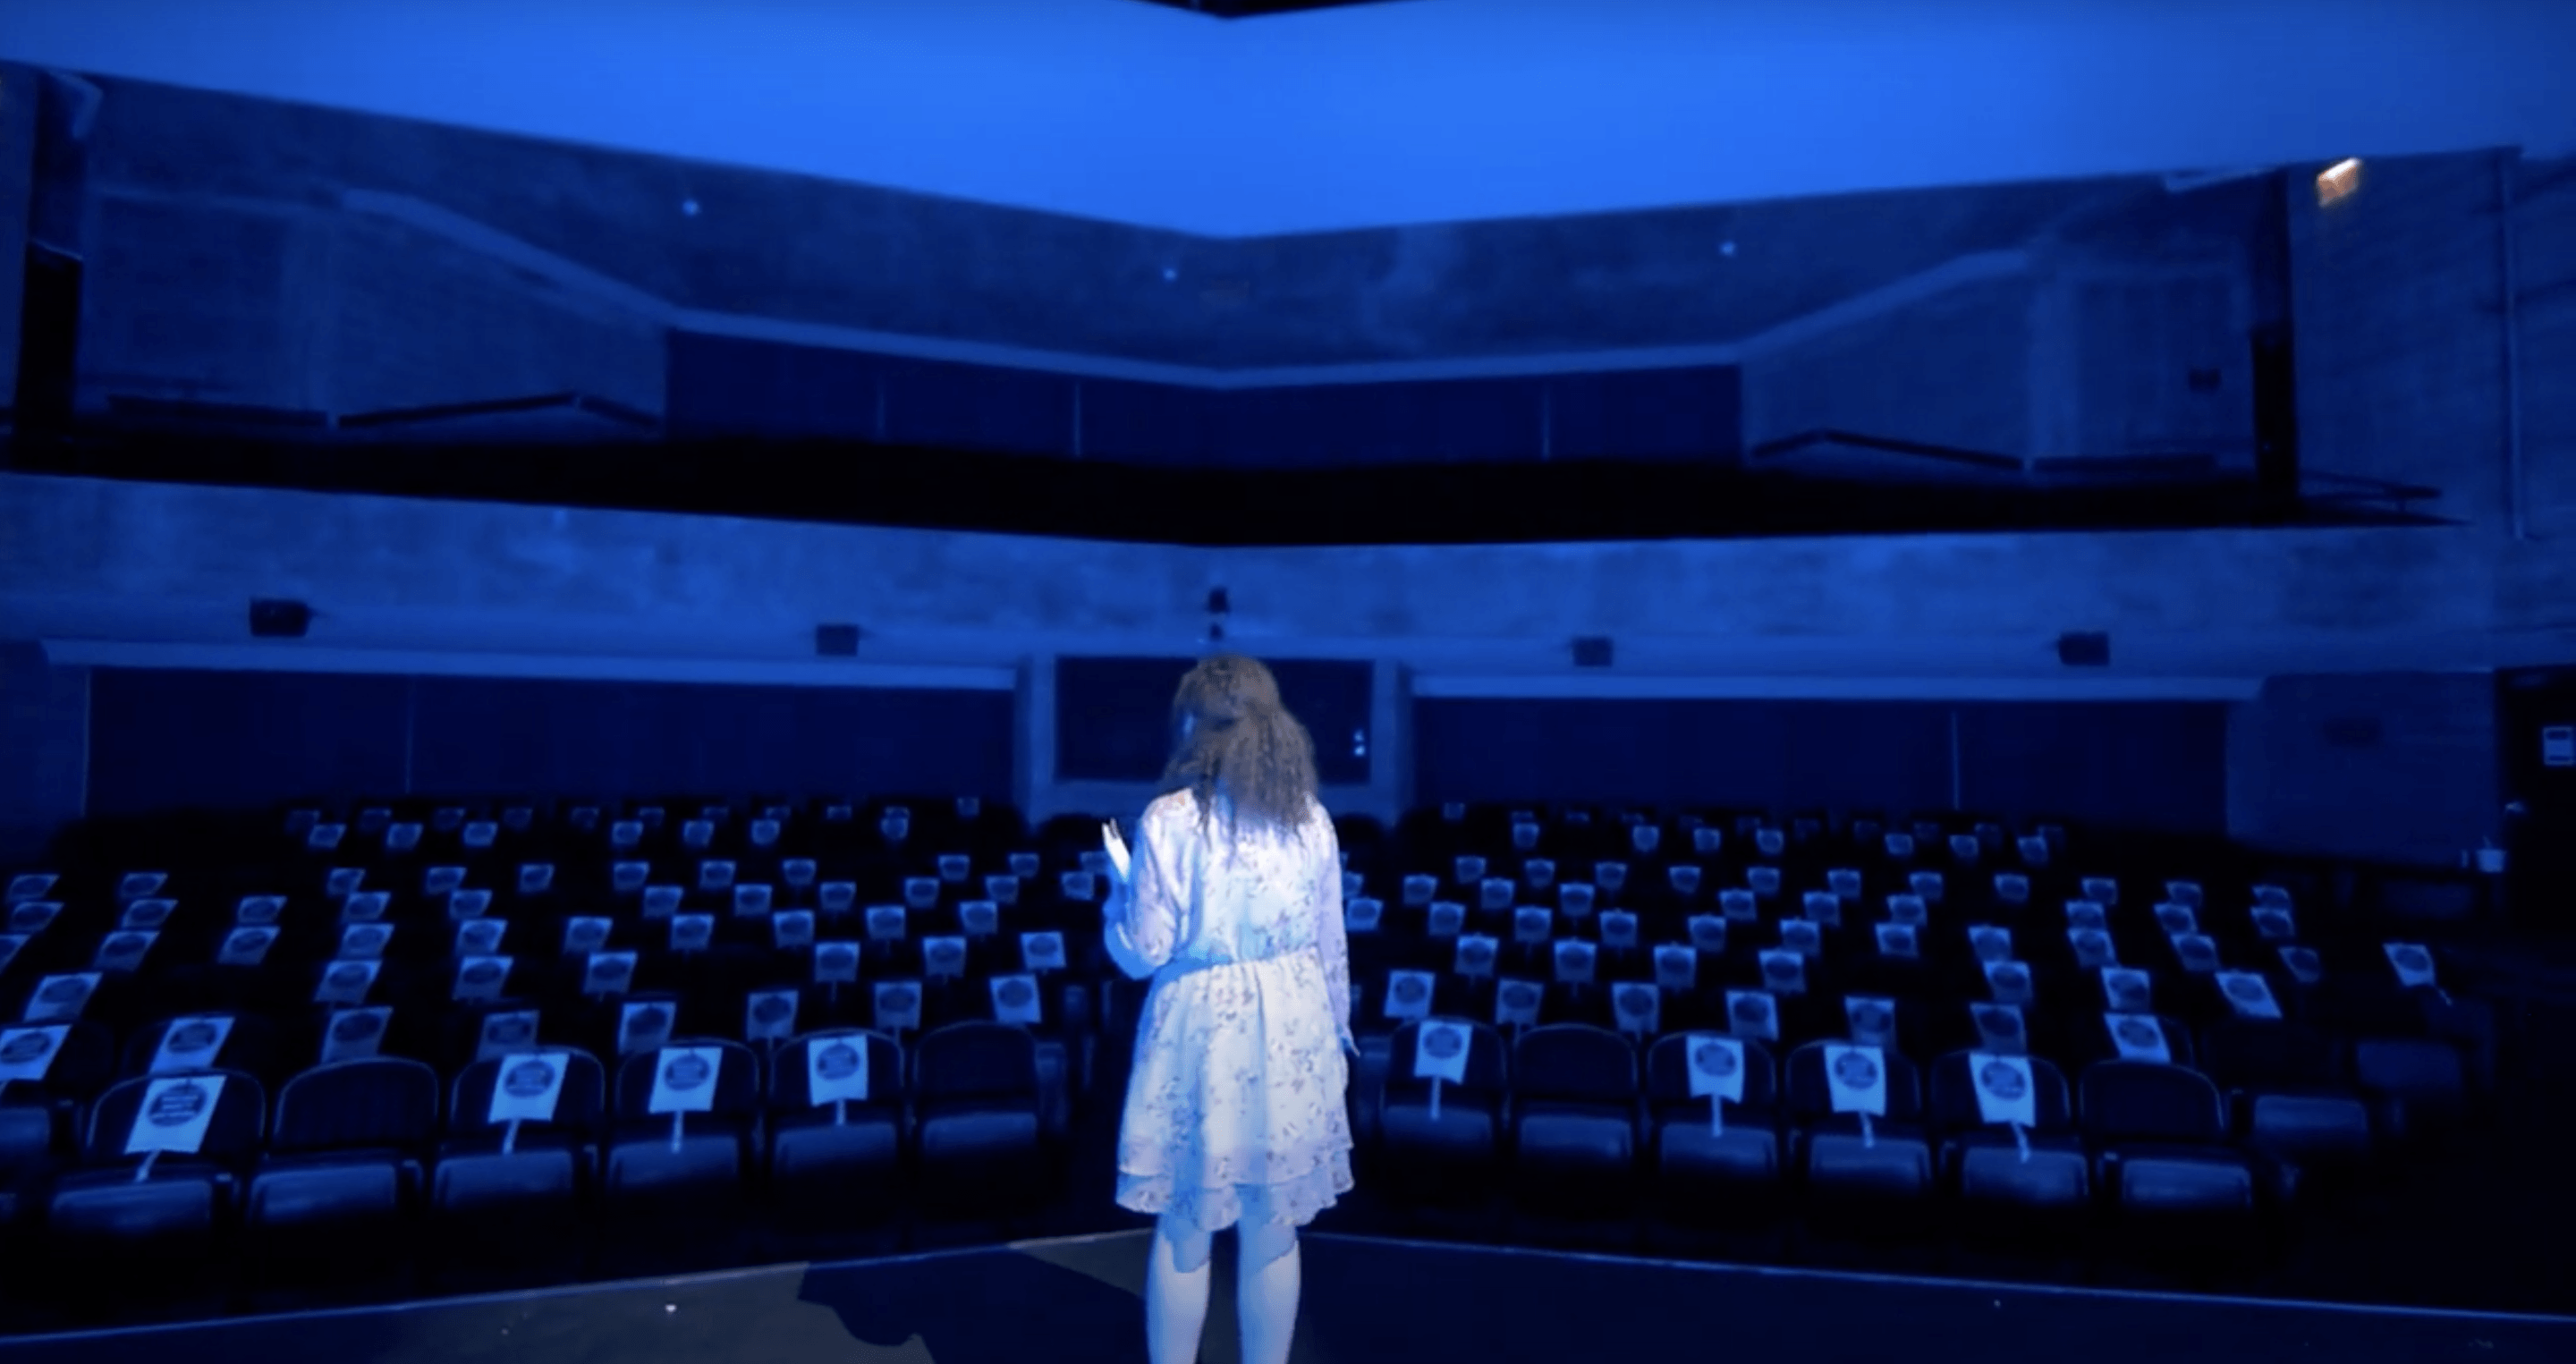 Character of For Z standing on stage looking out into an empty theater.